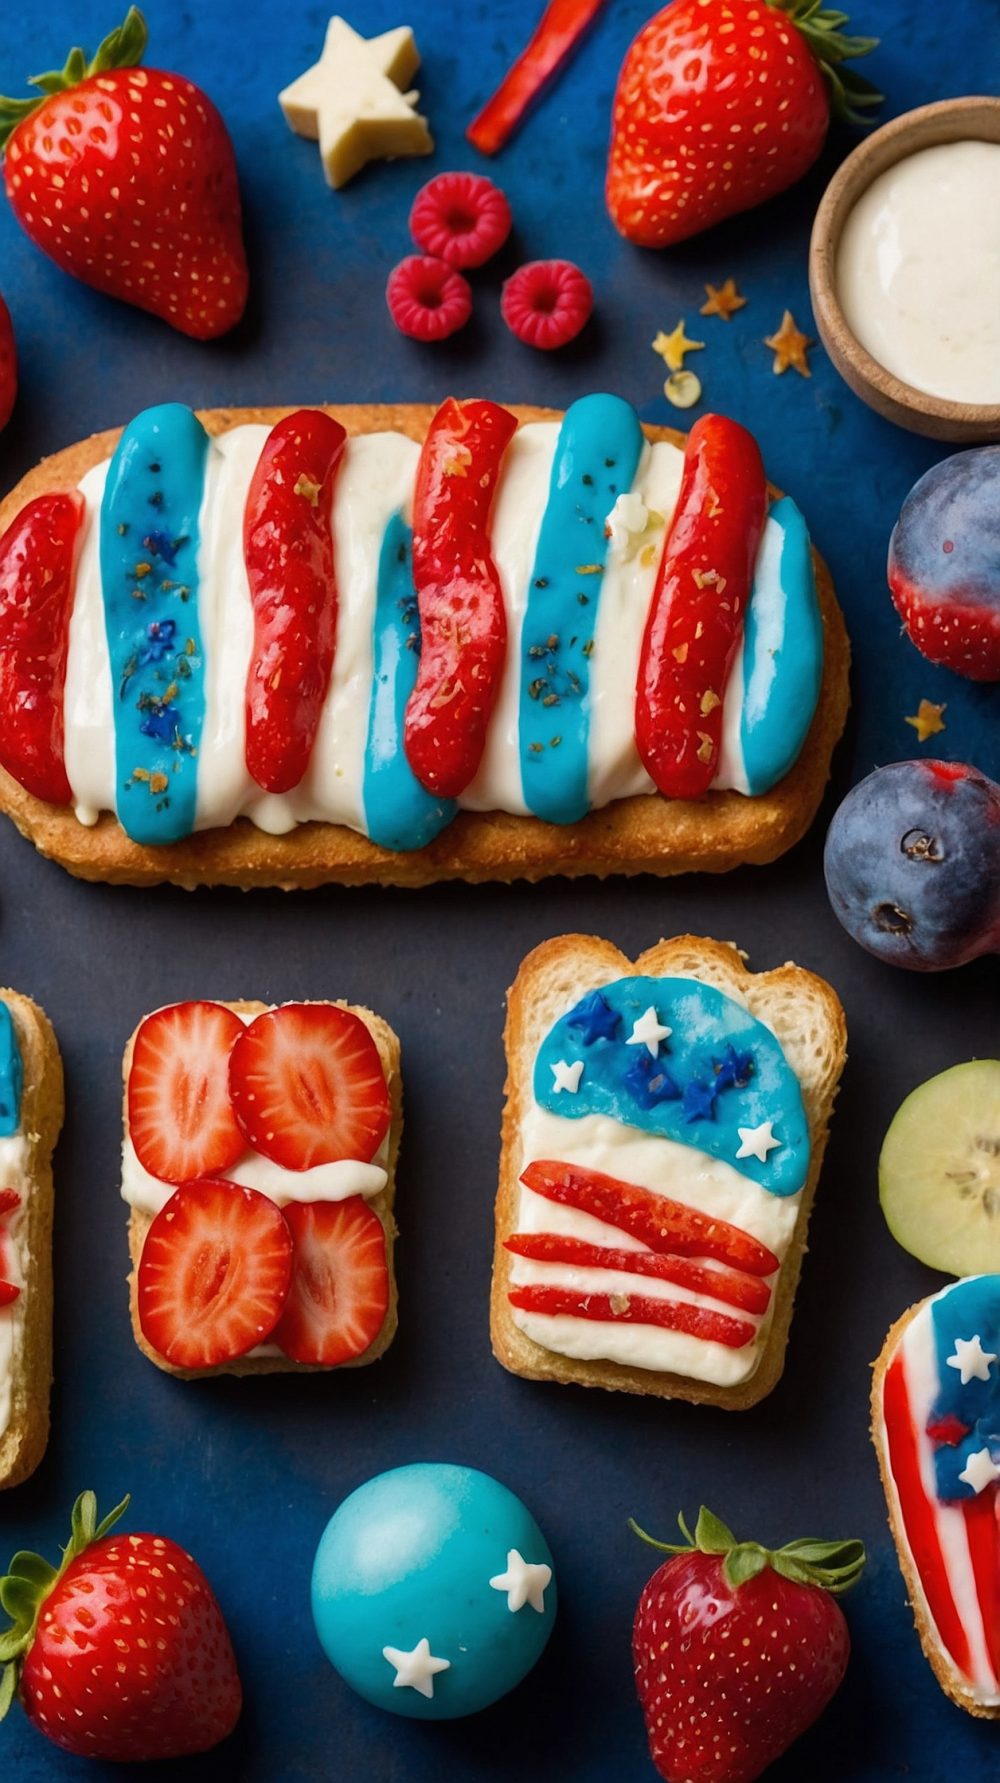 100 Best 4th of July Crafts for Kids